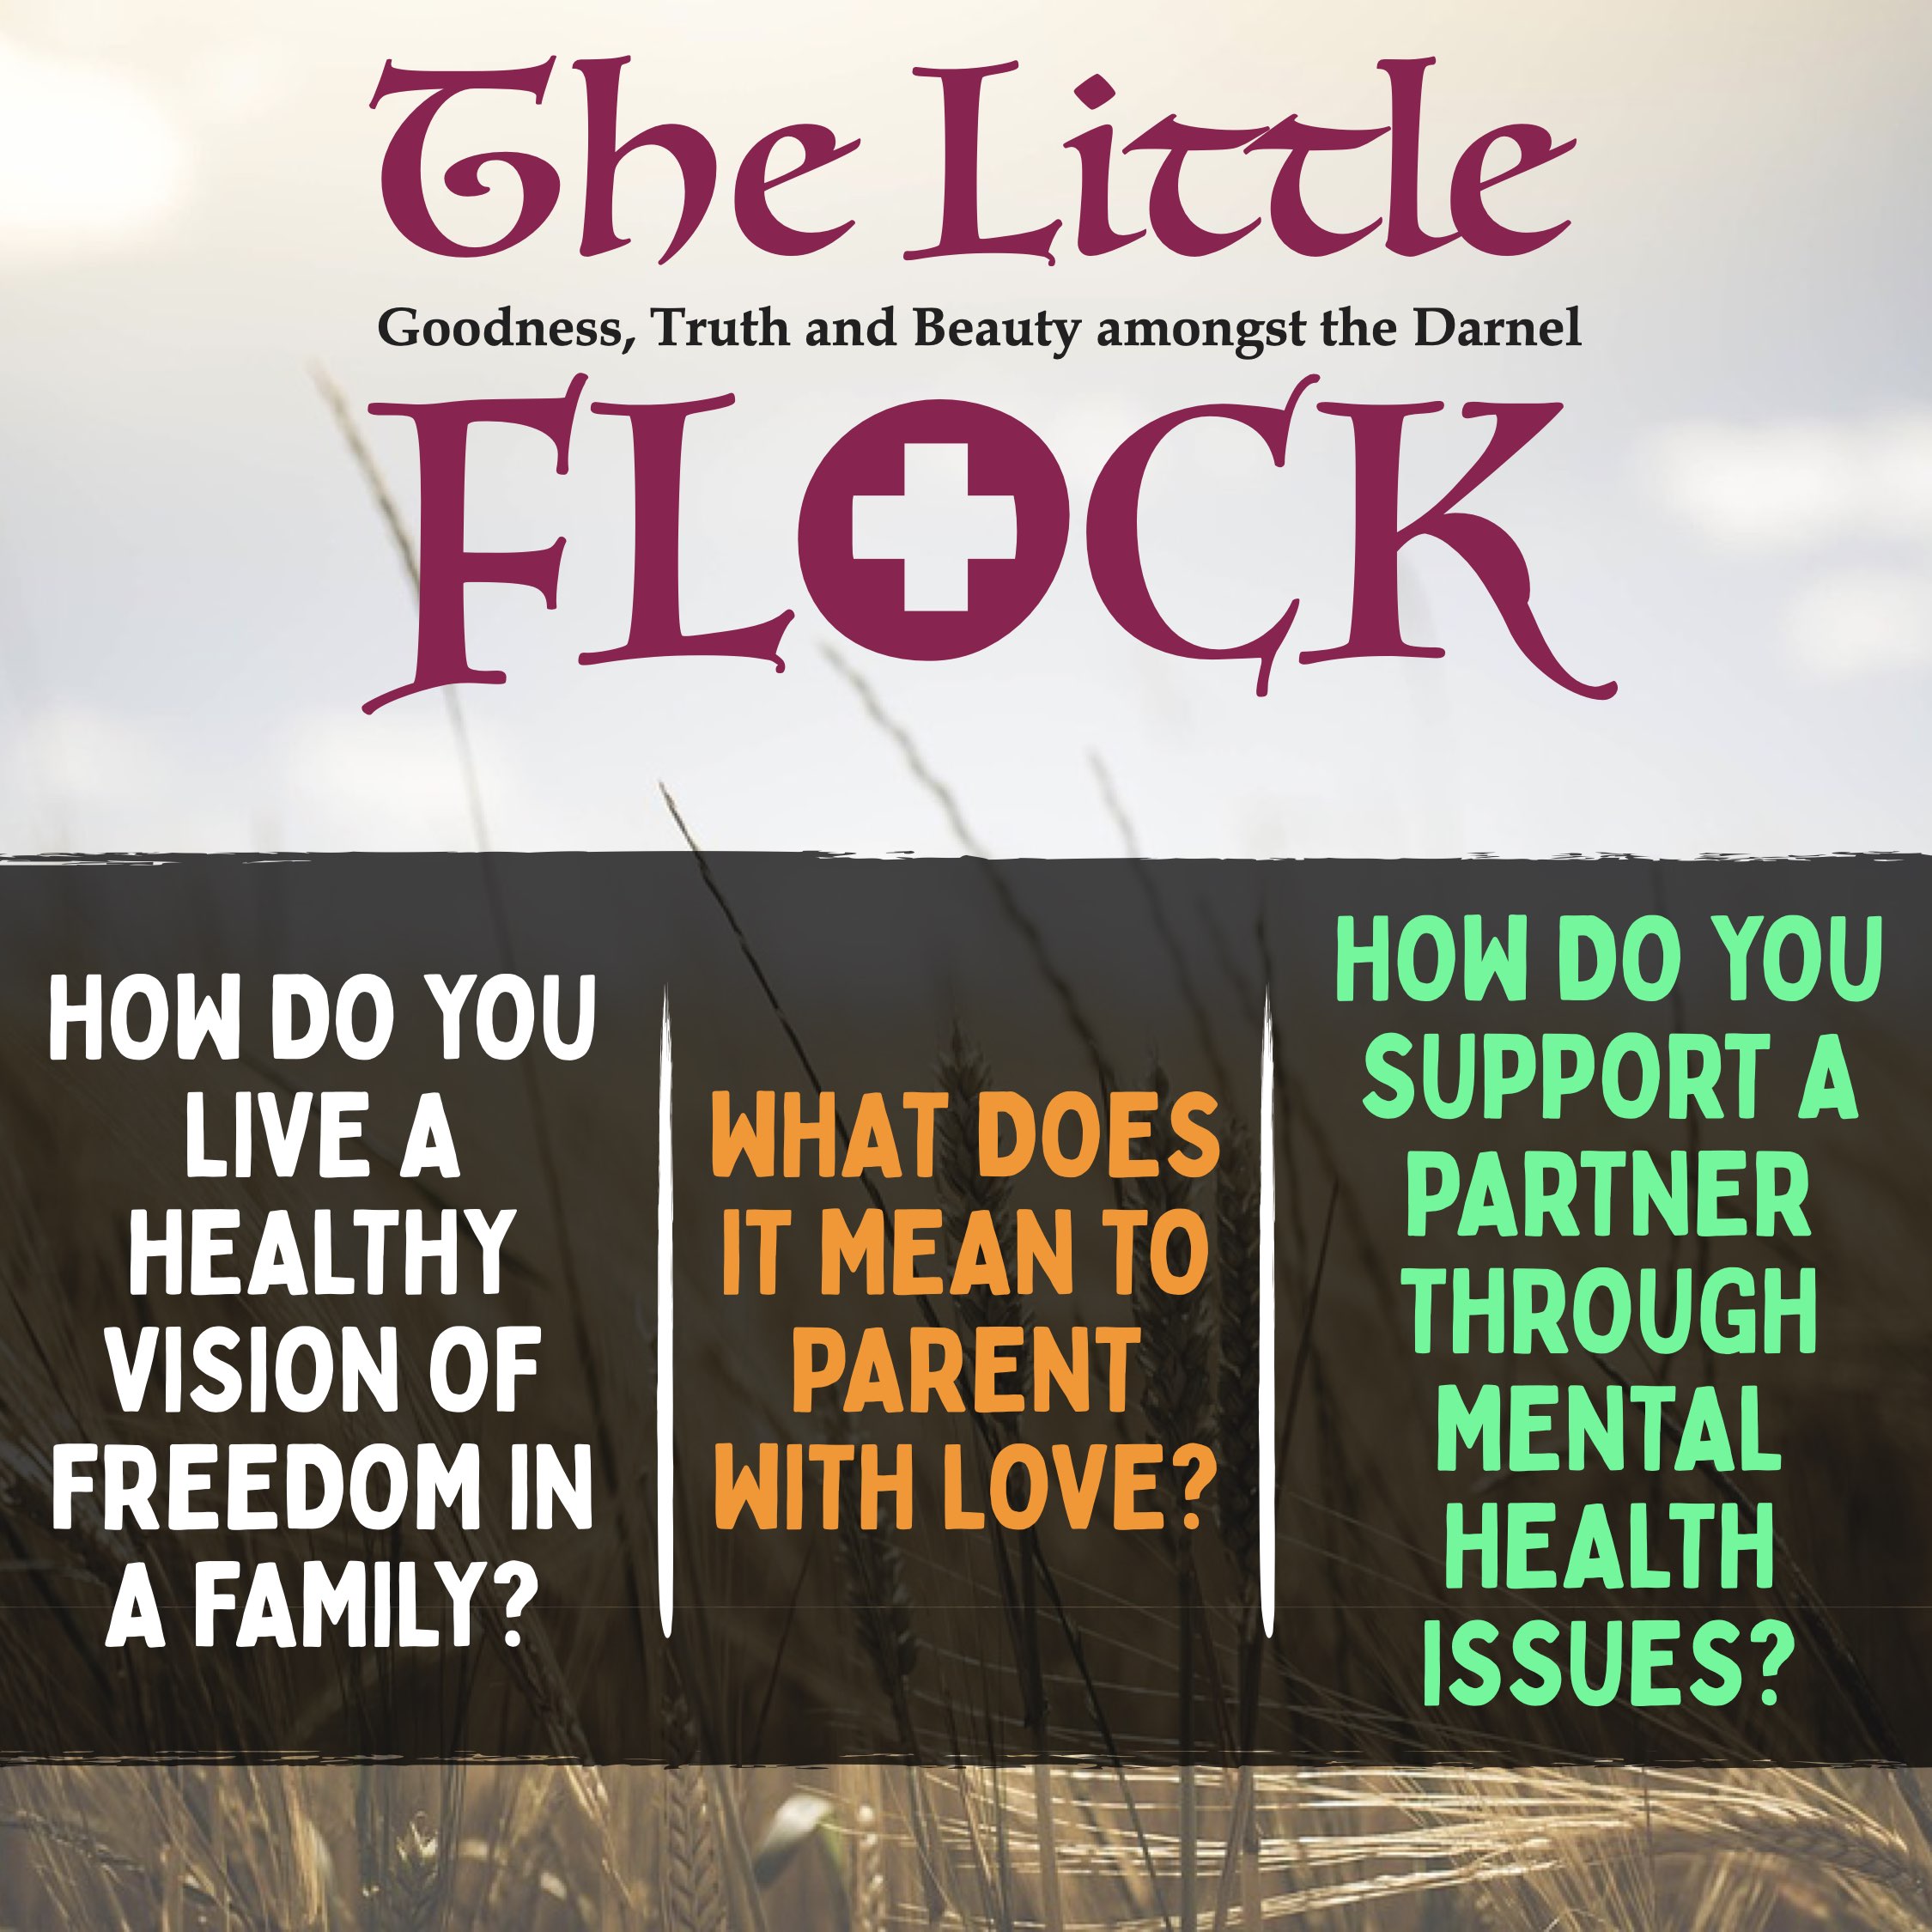 7. What does it mean to parent with love? How you support a partner through mental health issues?